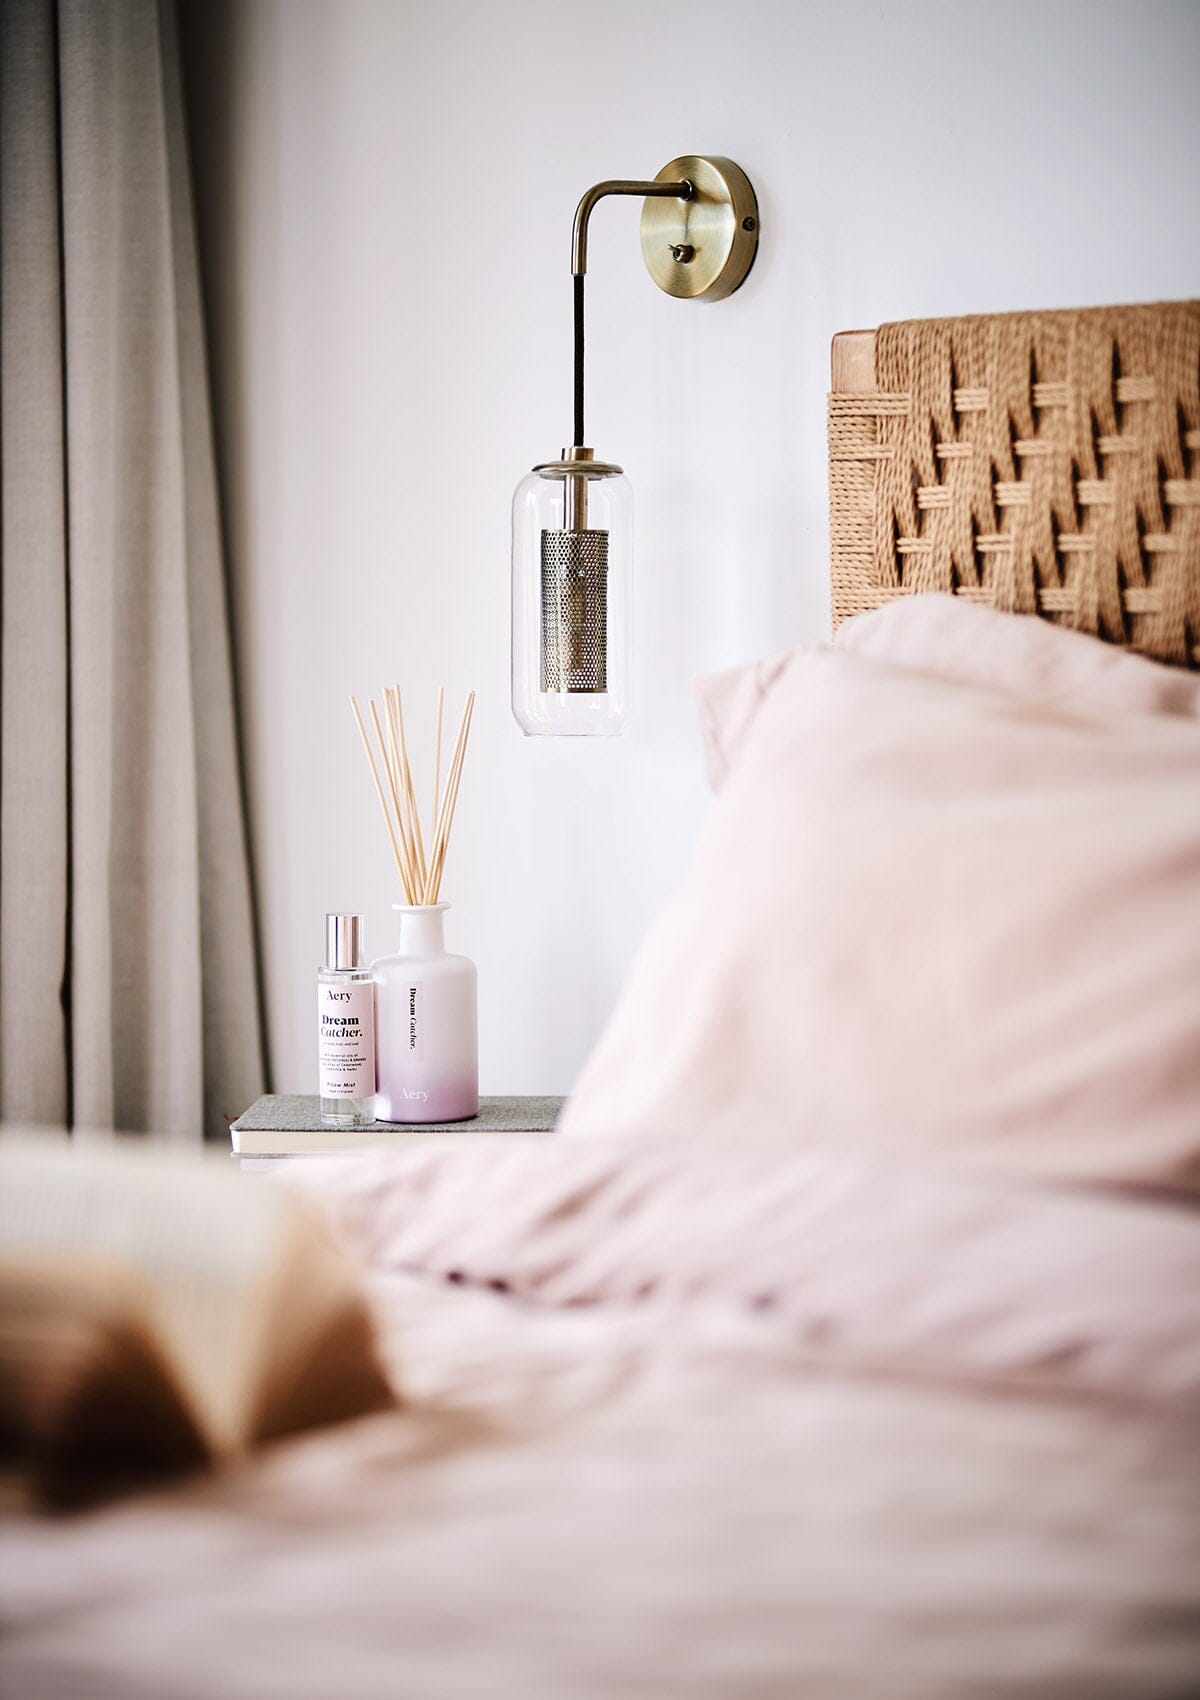 Lilac Dream Catcher pillow mist by Aery displayed next to diffuser in bedroom on bedside table